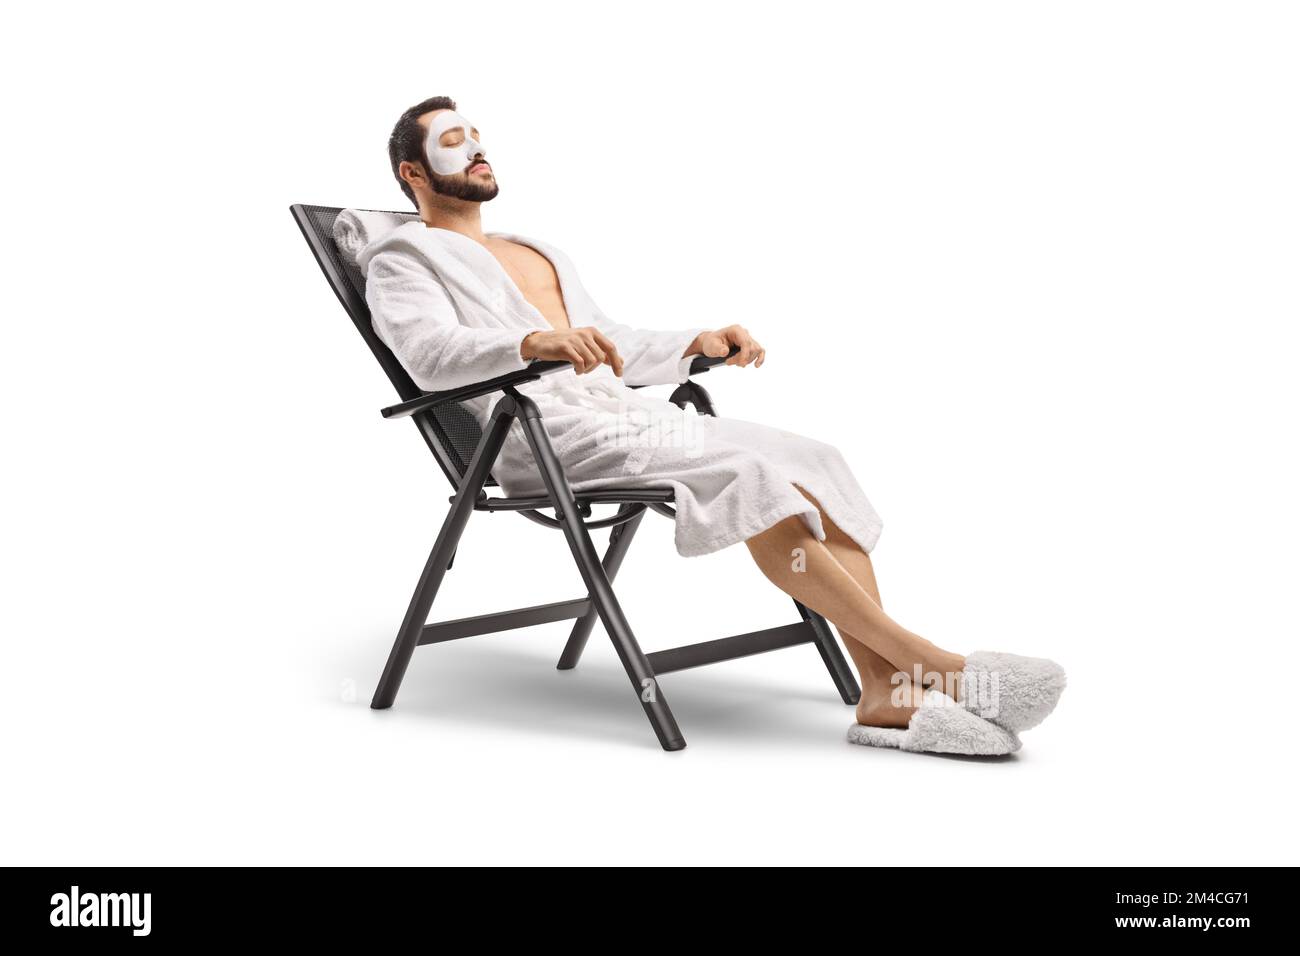 Man in a bathrobe with a face mask relaxing on a chair isolated on white background Stock Photo